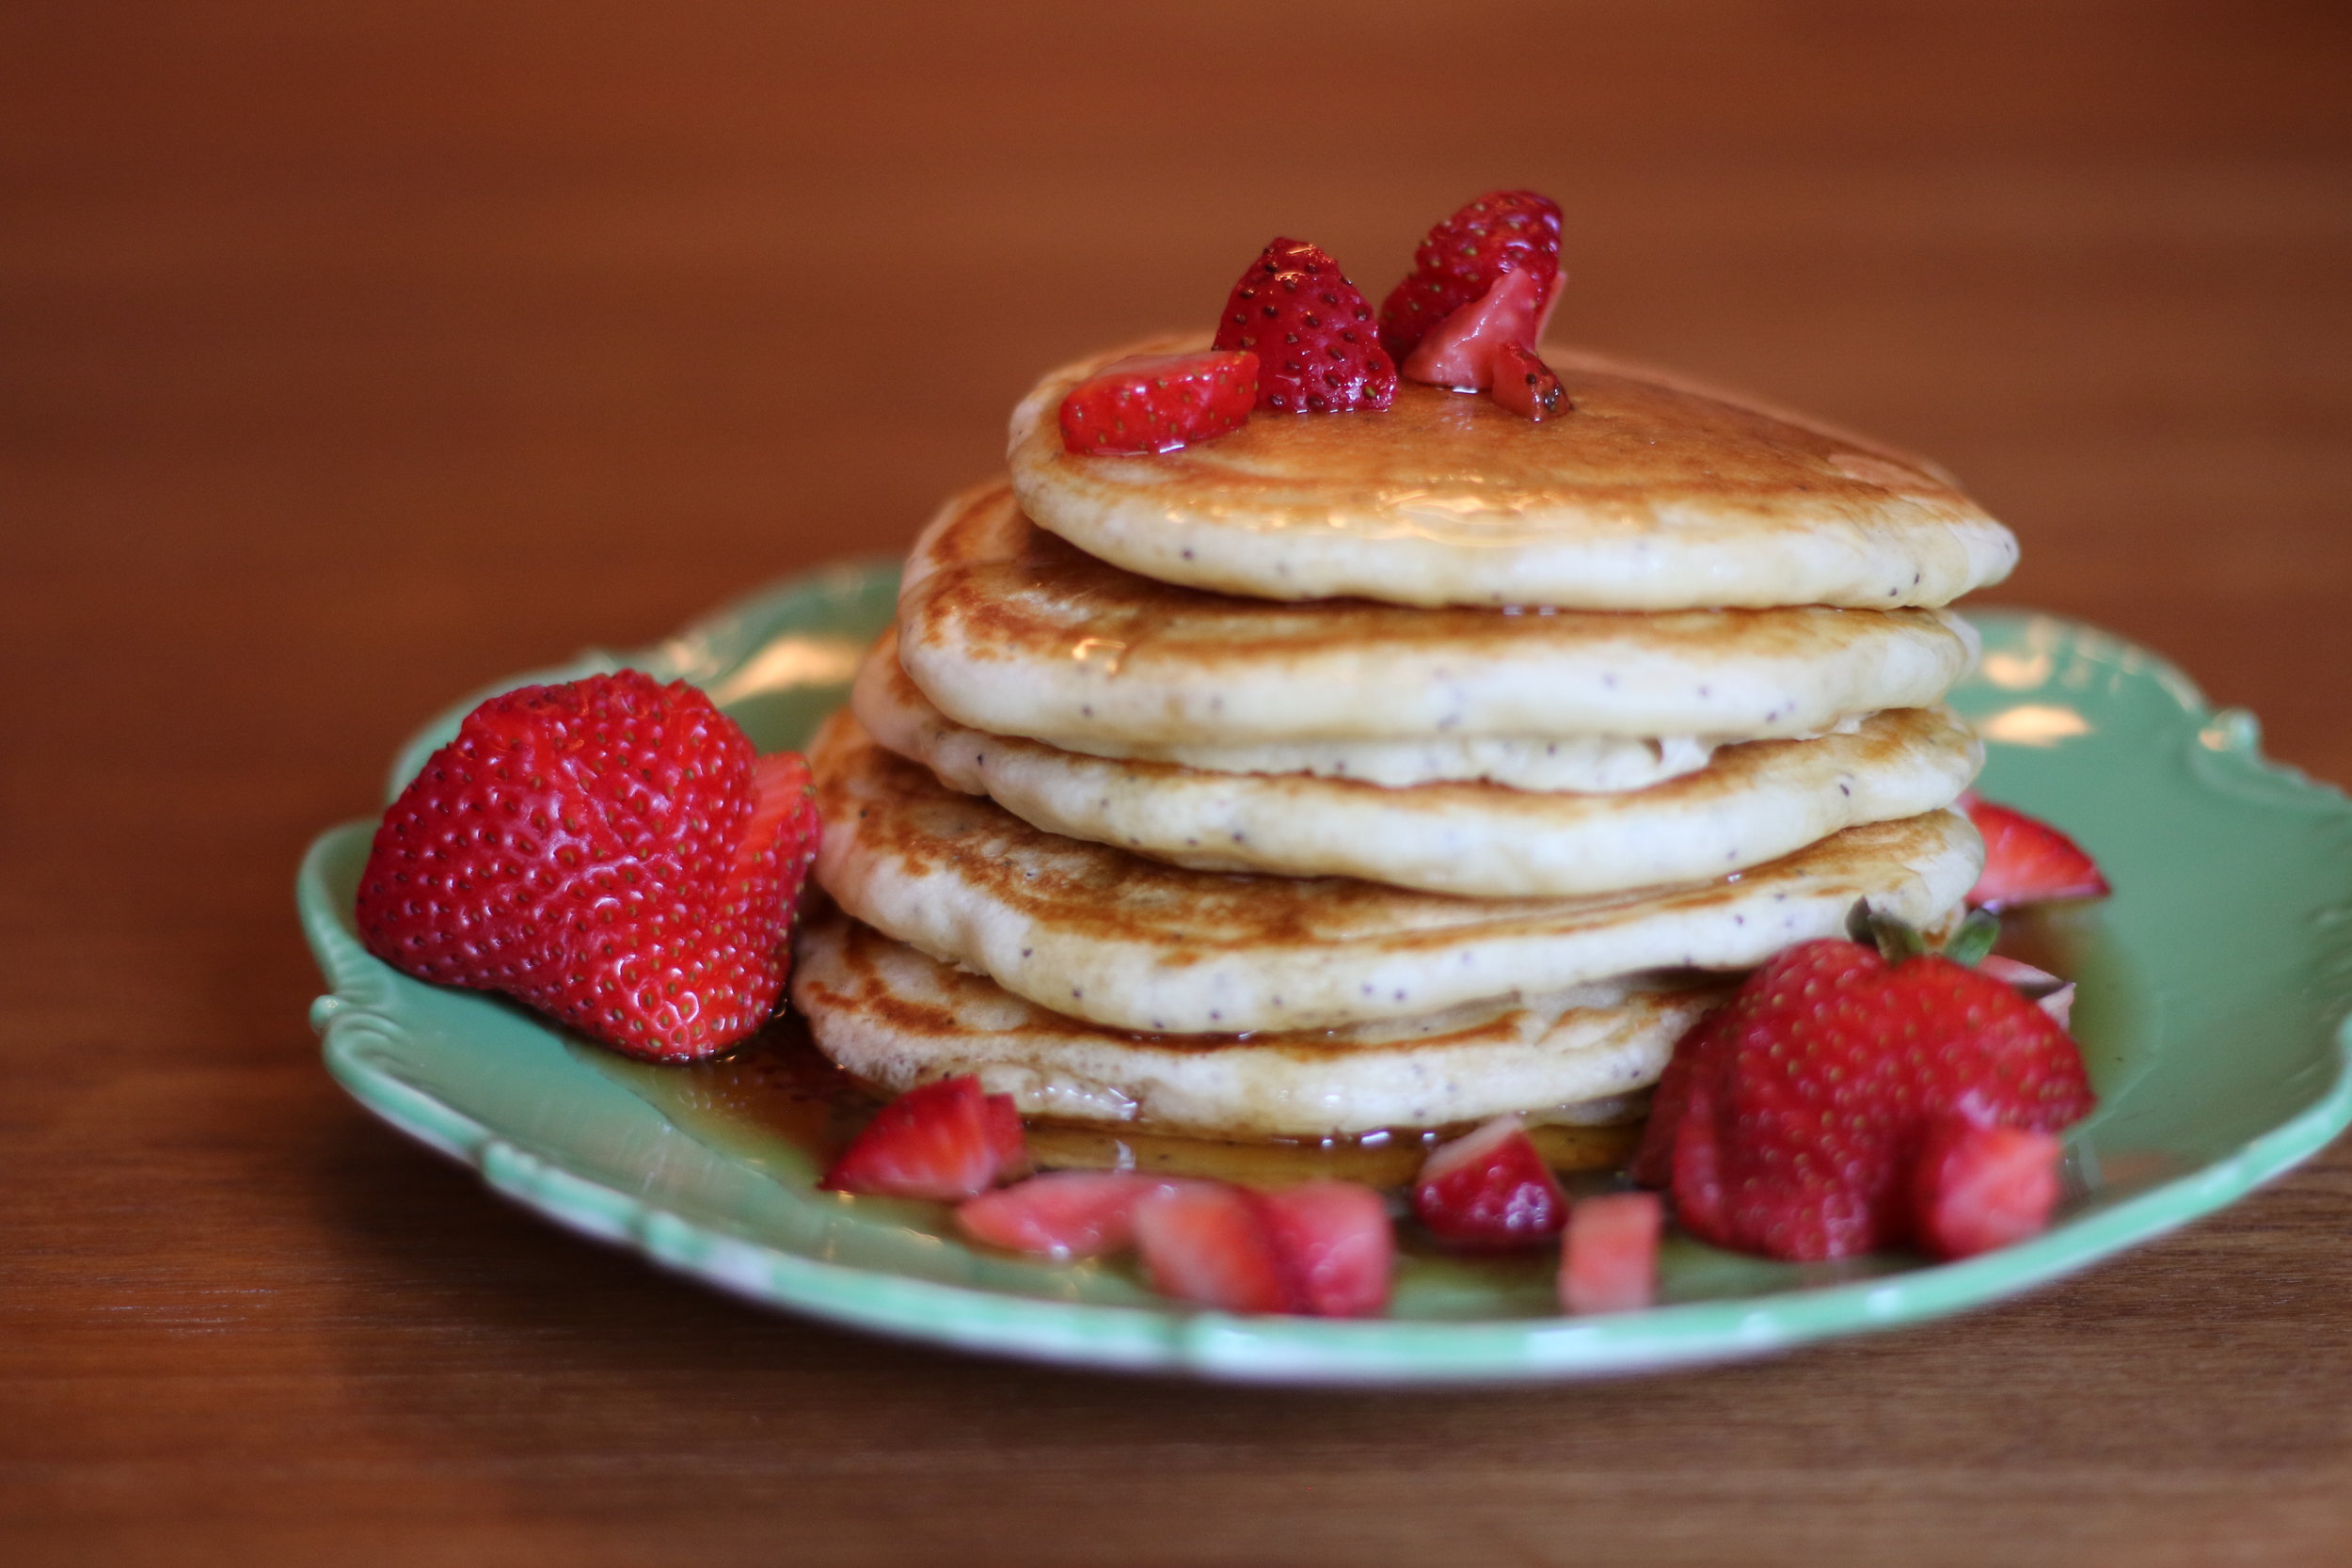 Alt text: a stack of 5 pancakes sit on a pretty green plate, covered in syrup and cut strawberries